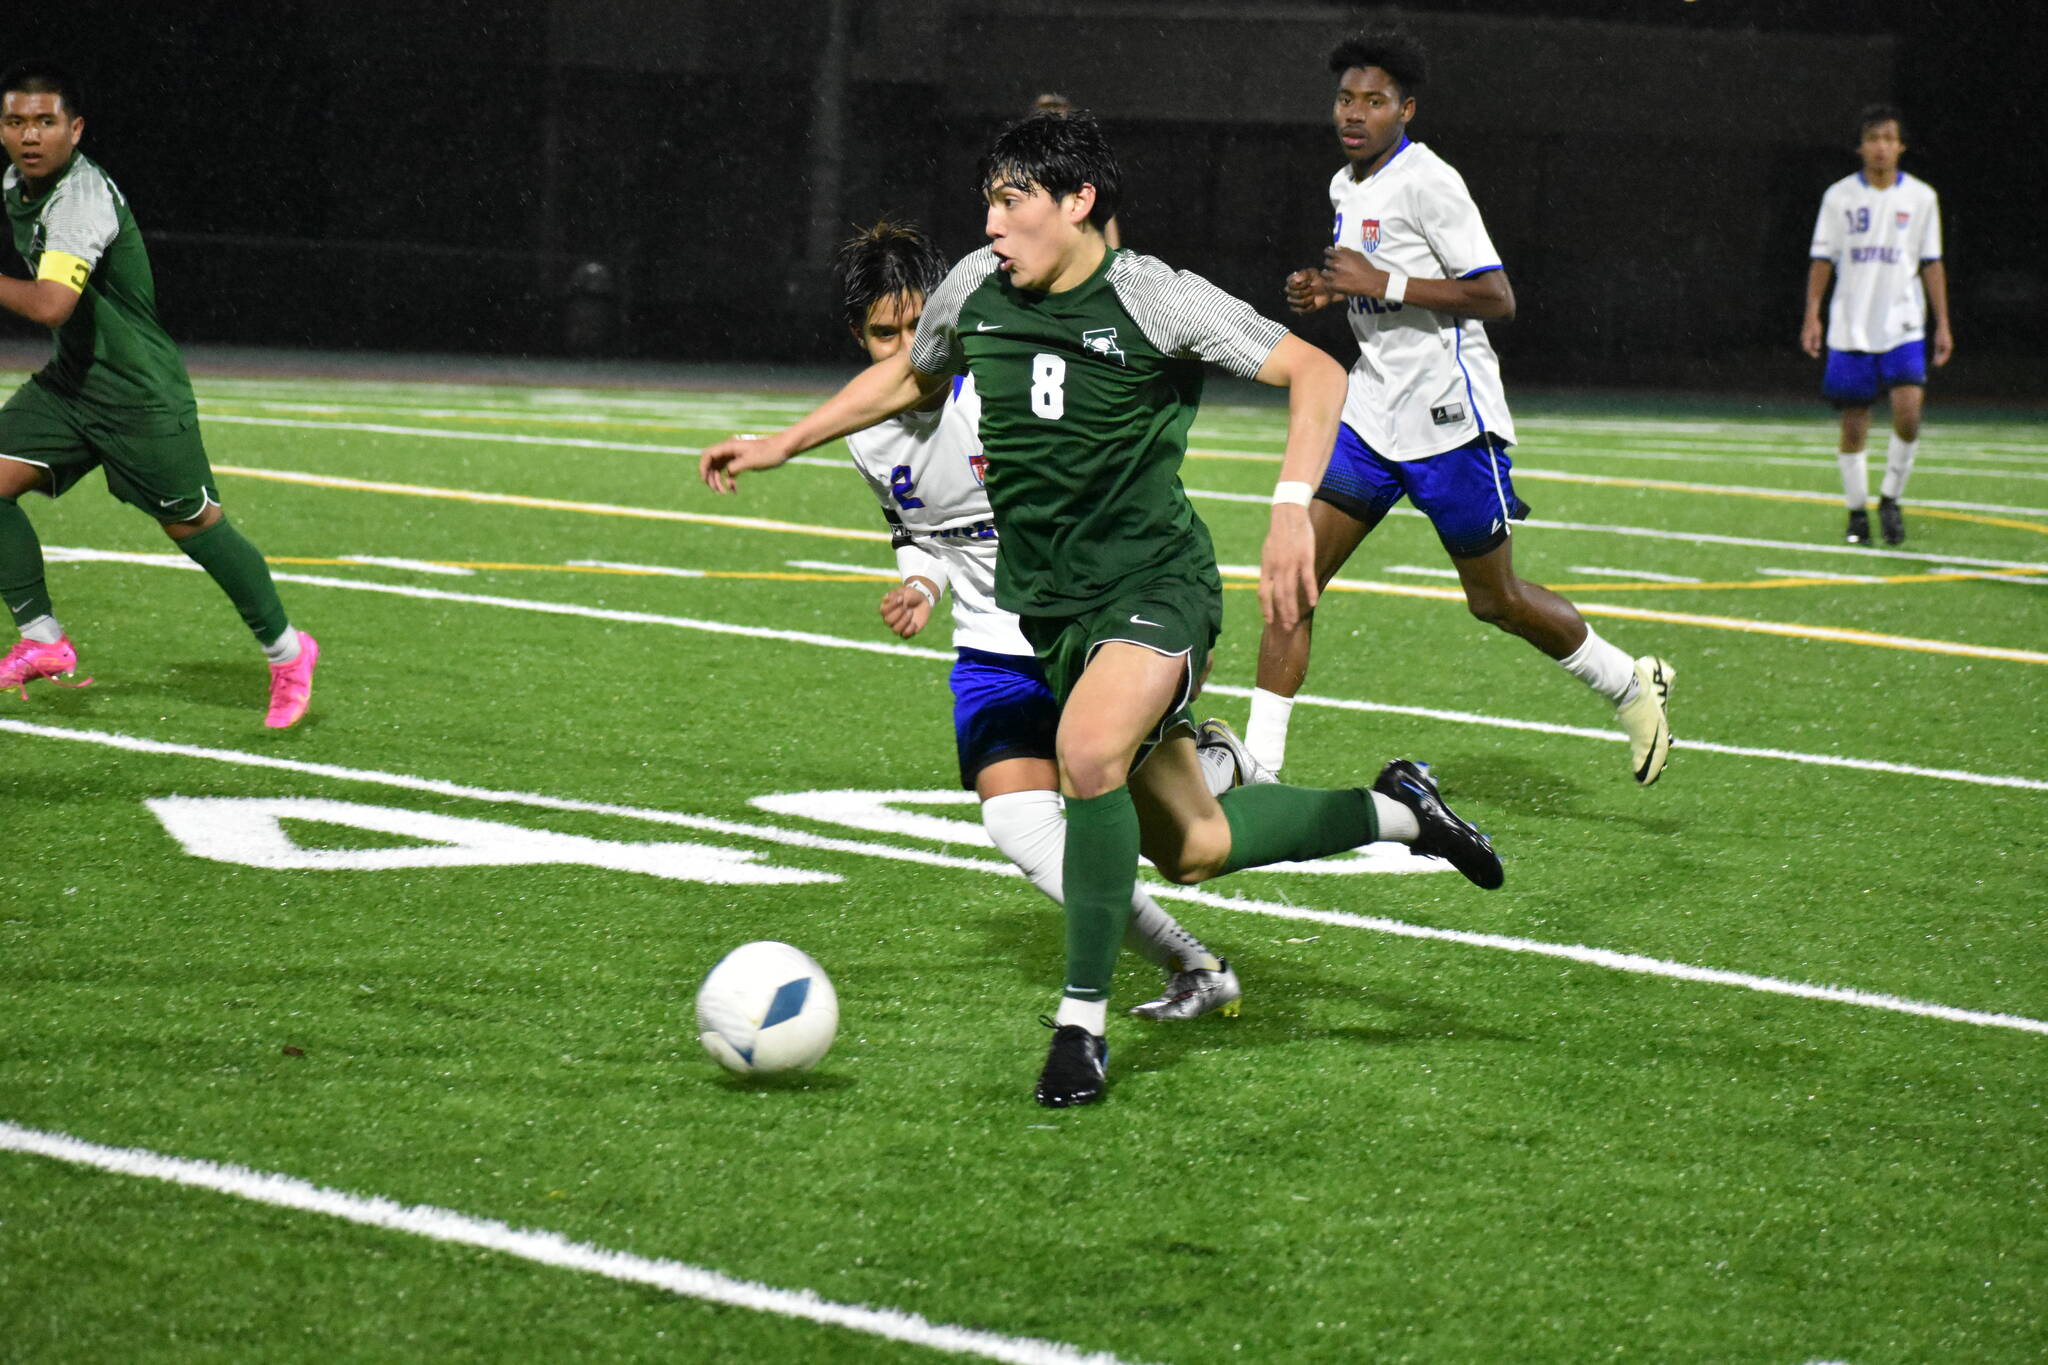 Jesus Magana takes the ball up the field for the Trojans. Ben Ray / The Reporter